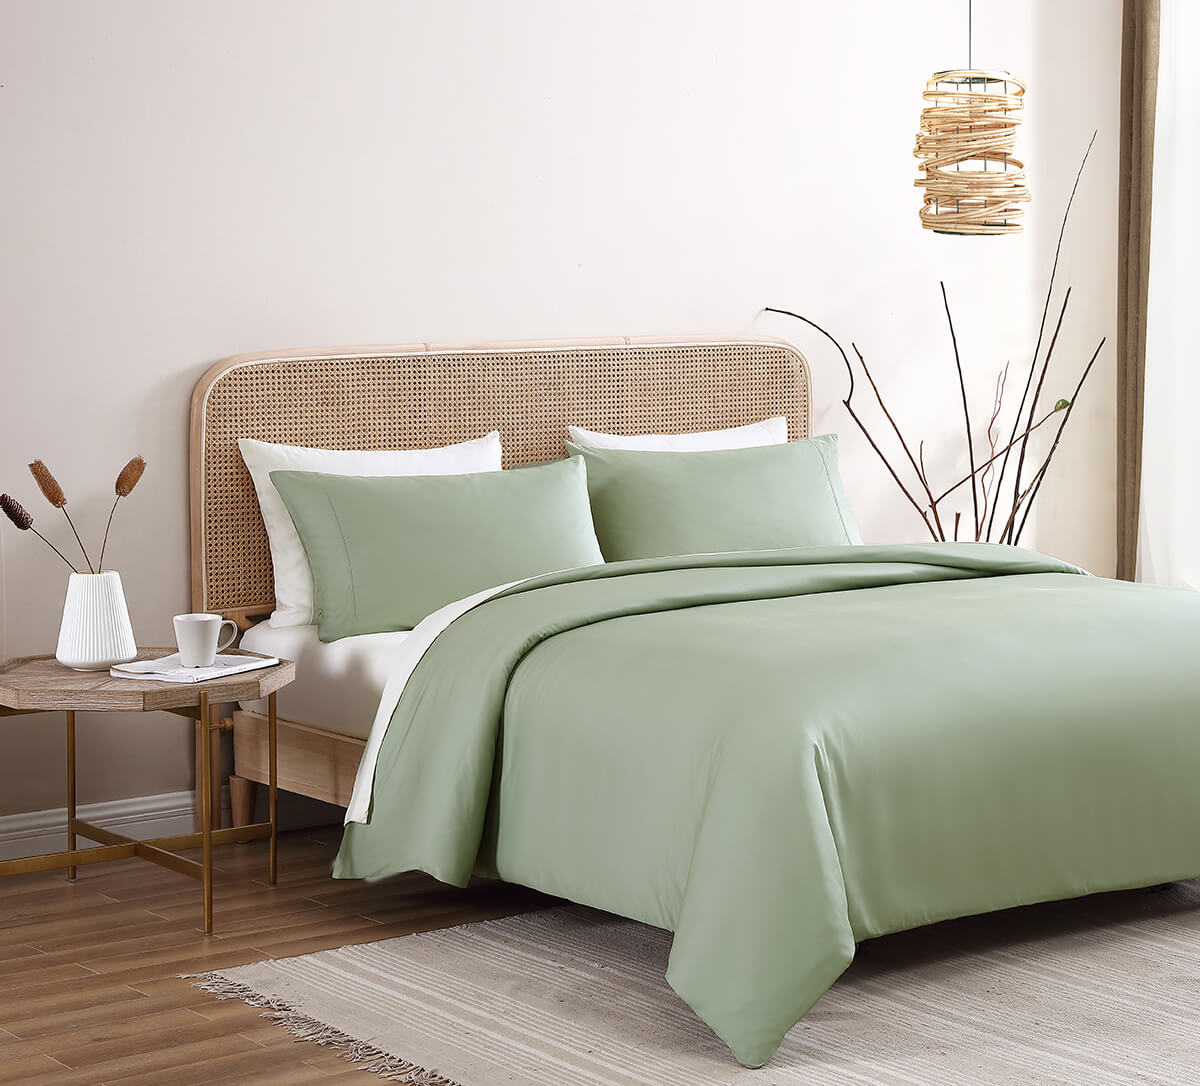 Bamboo Bedding: Sunday Citizen creates the most amazing bamboo sheets, bamboo blankets, bamboo pillowcases, and bamboo duvet covers on the market! 